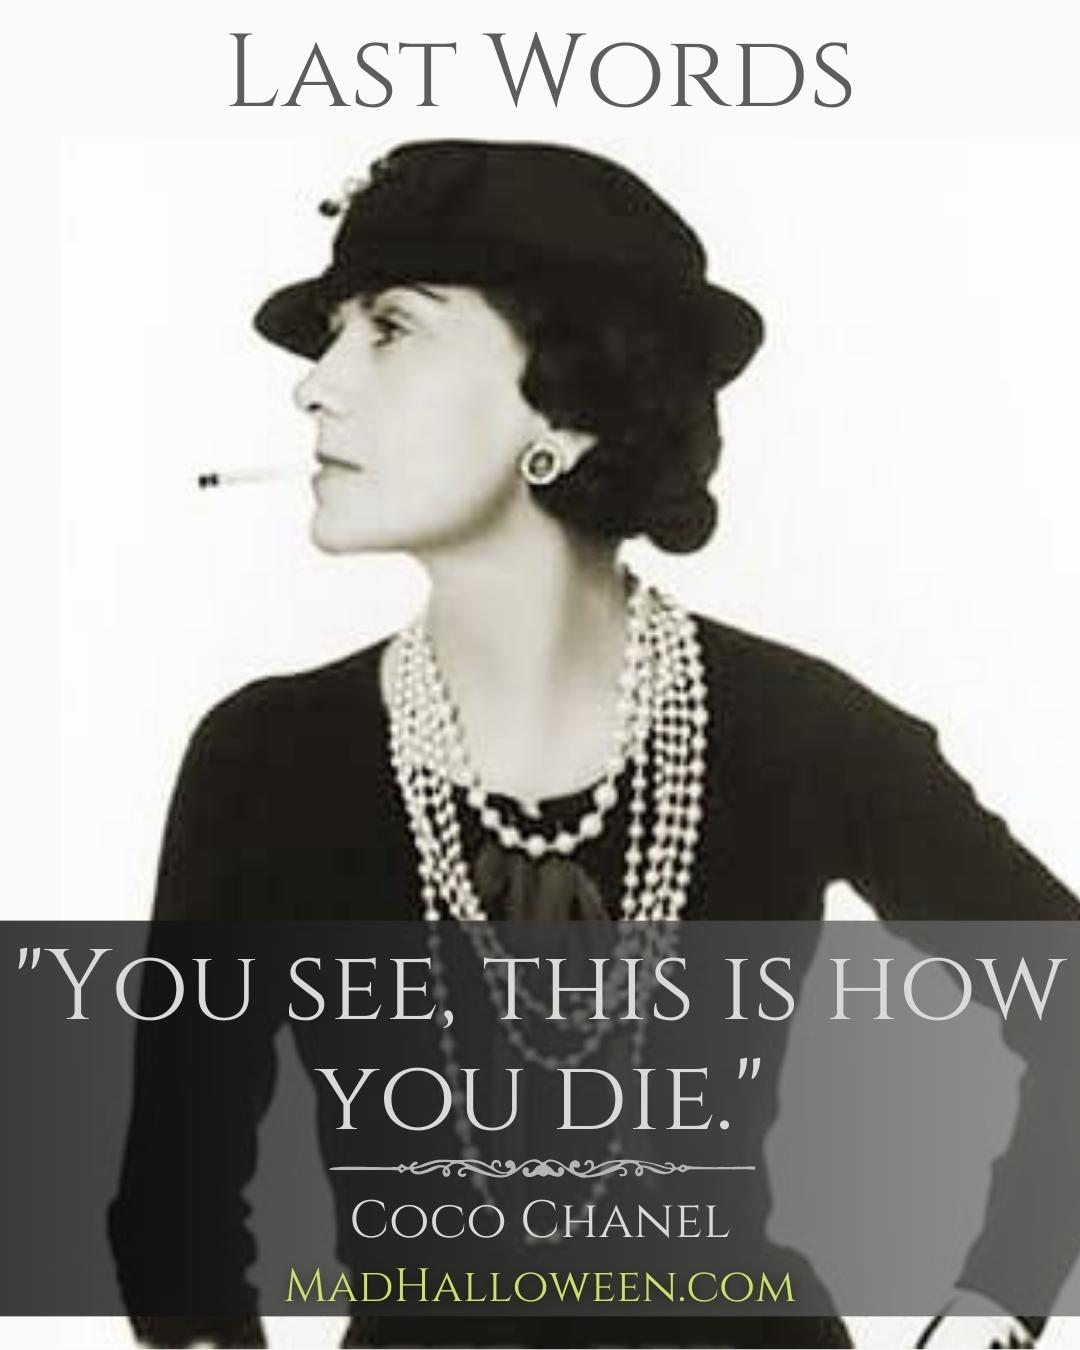 Famous Last Words Quotes of the Departed - Coco Chanel - Mad Halloween